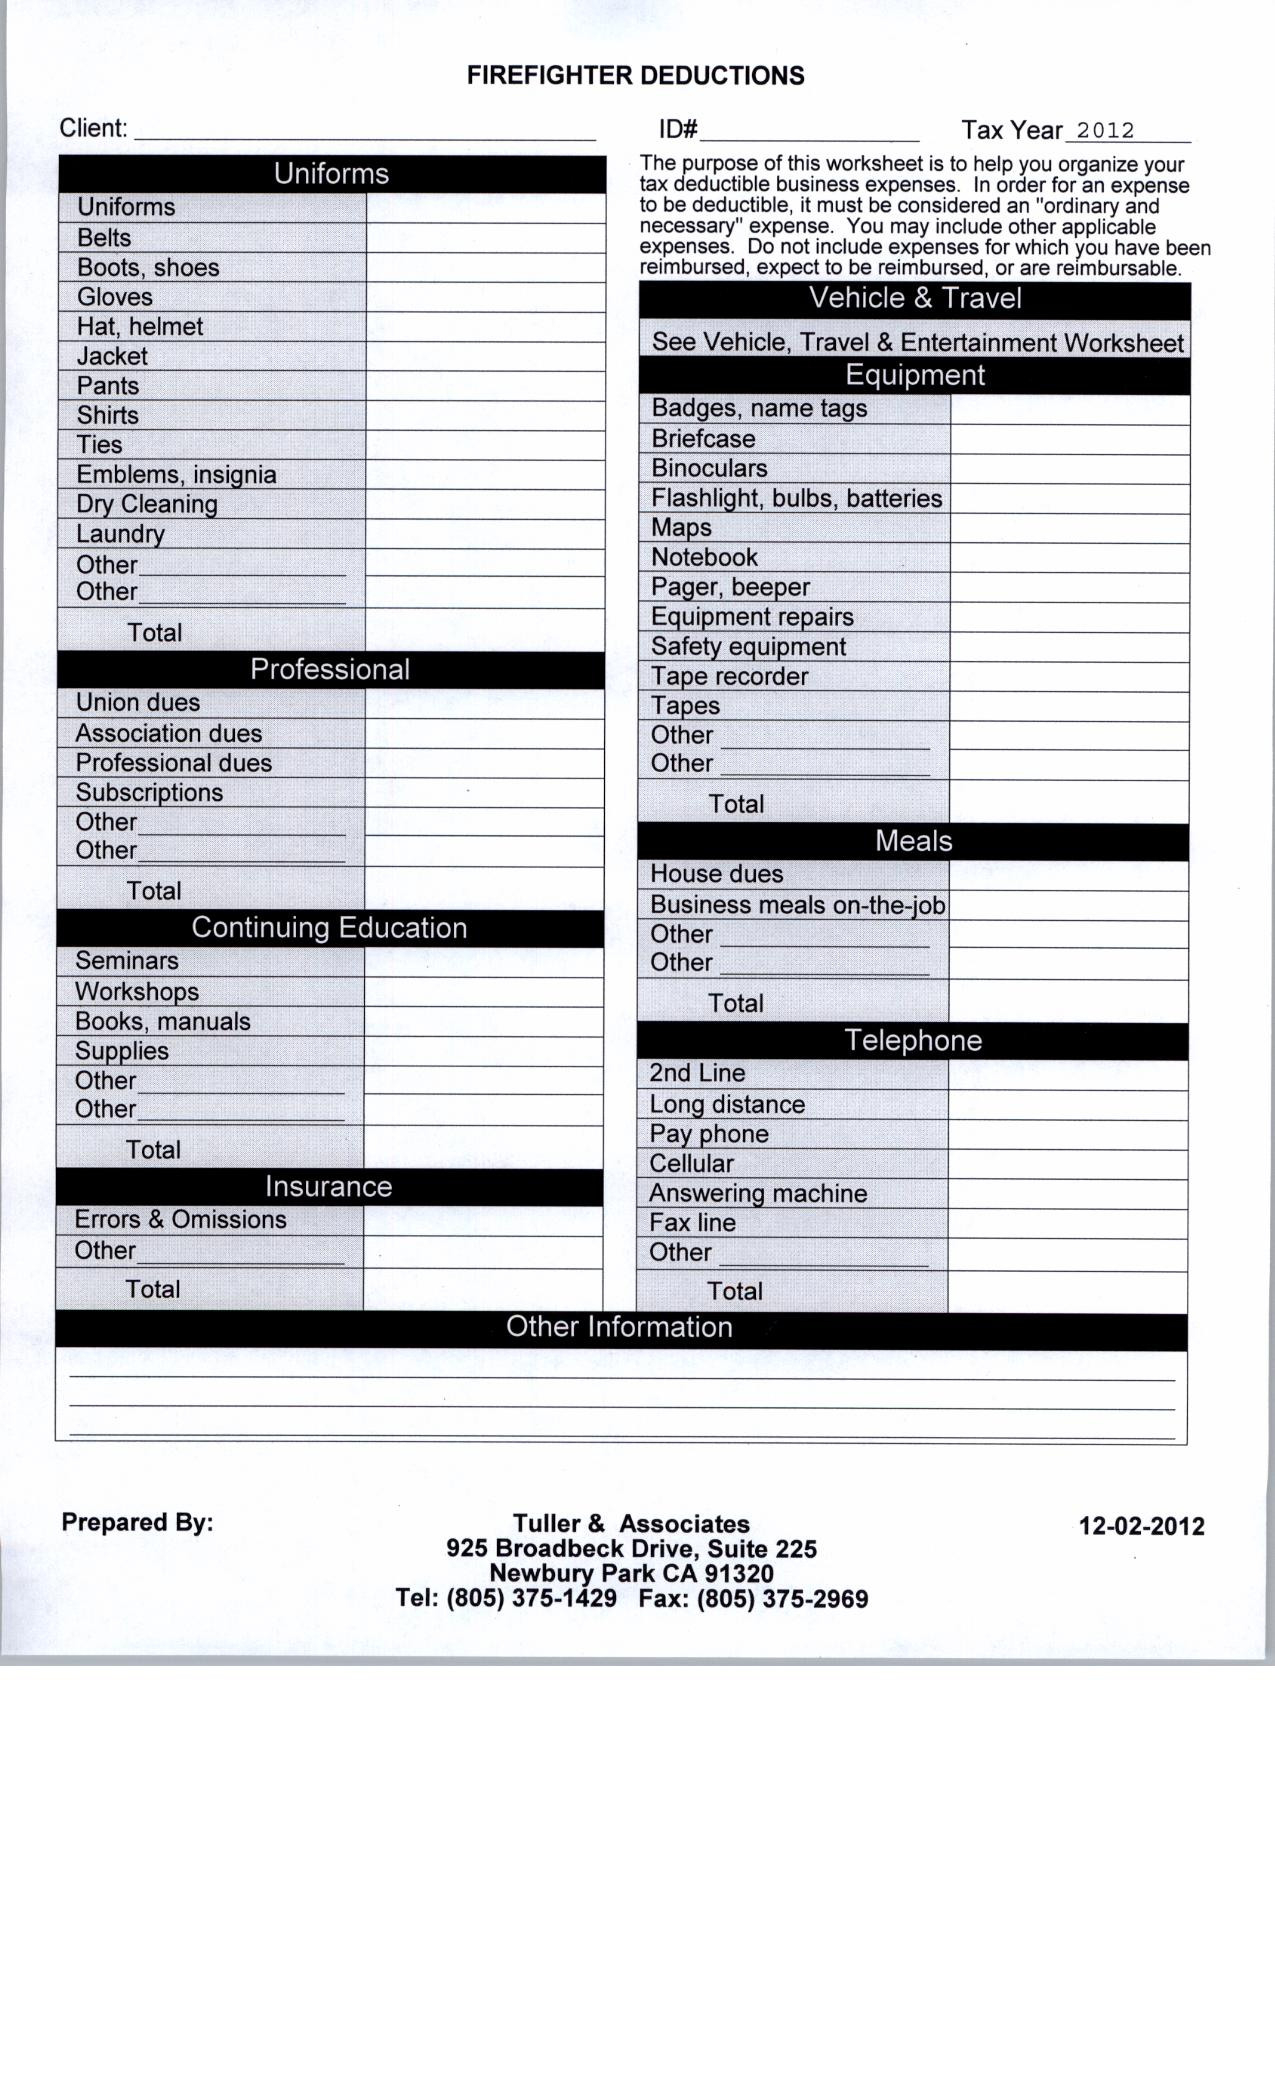 clergy-housing-allonce-worksheet-2017-scriptclub-db-excel